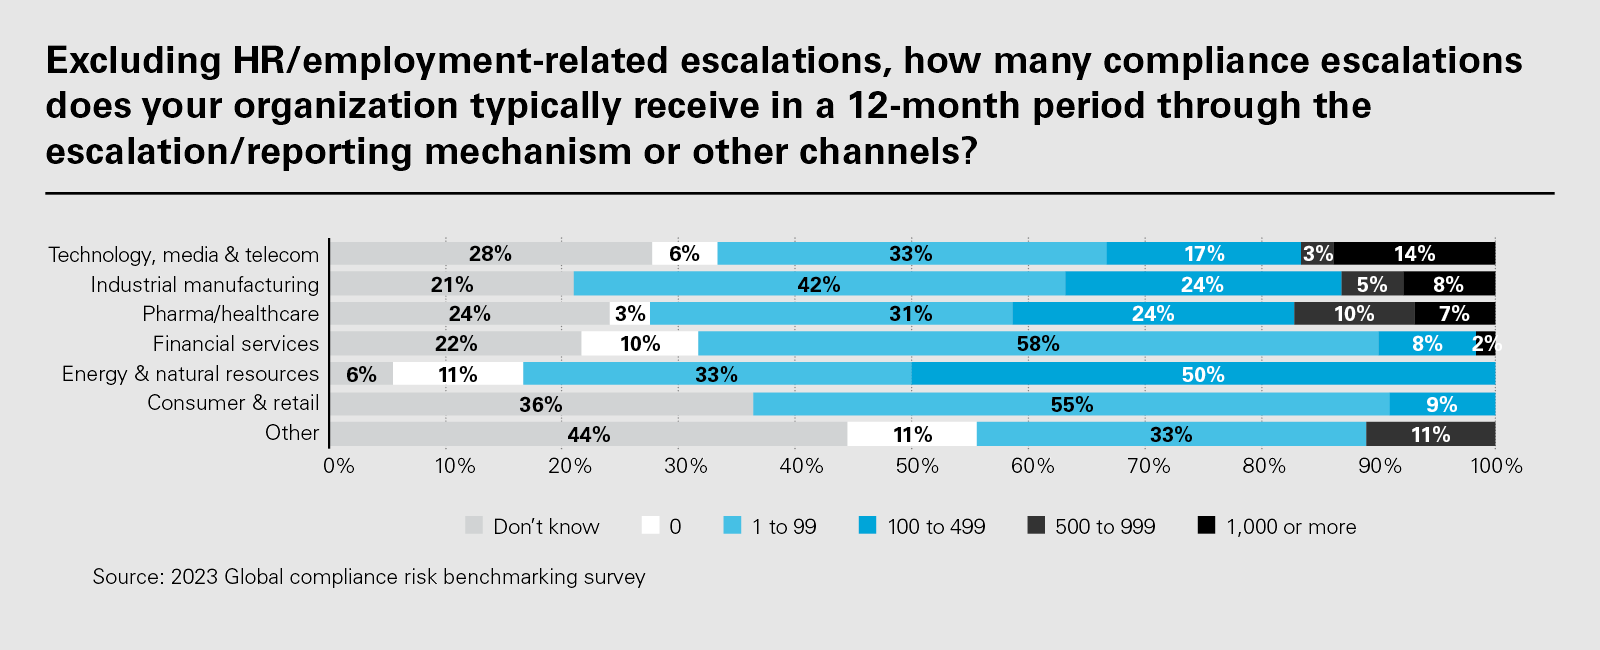 Excluding HR/employment-related escalations, how many compliance escalations does your organization typically receive in a 12-month period through the escalation/reporting mechanism or other channels?